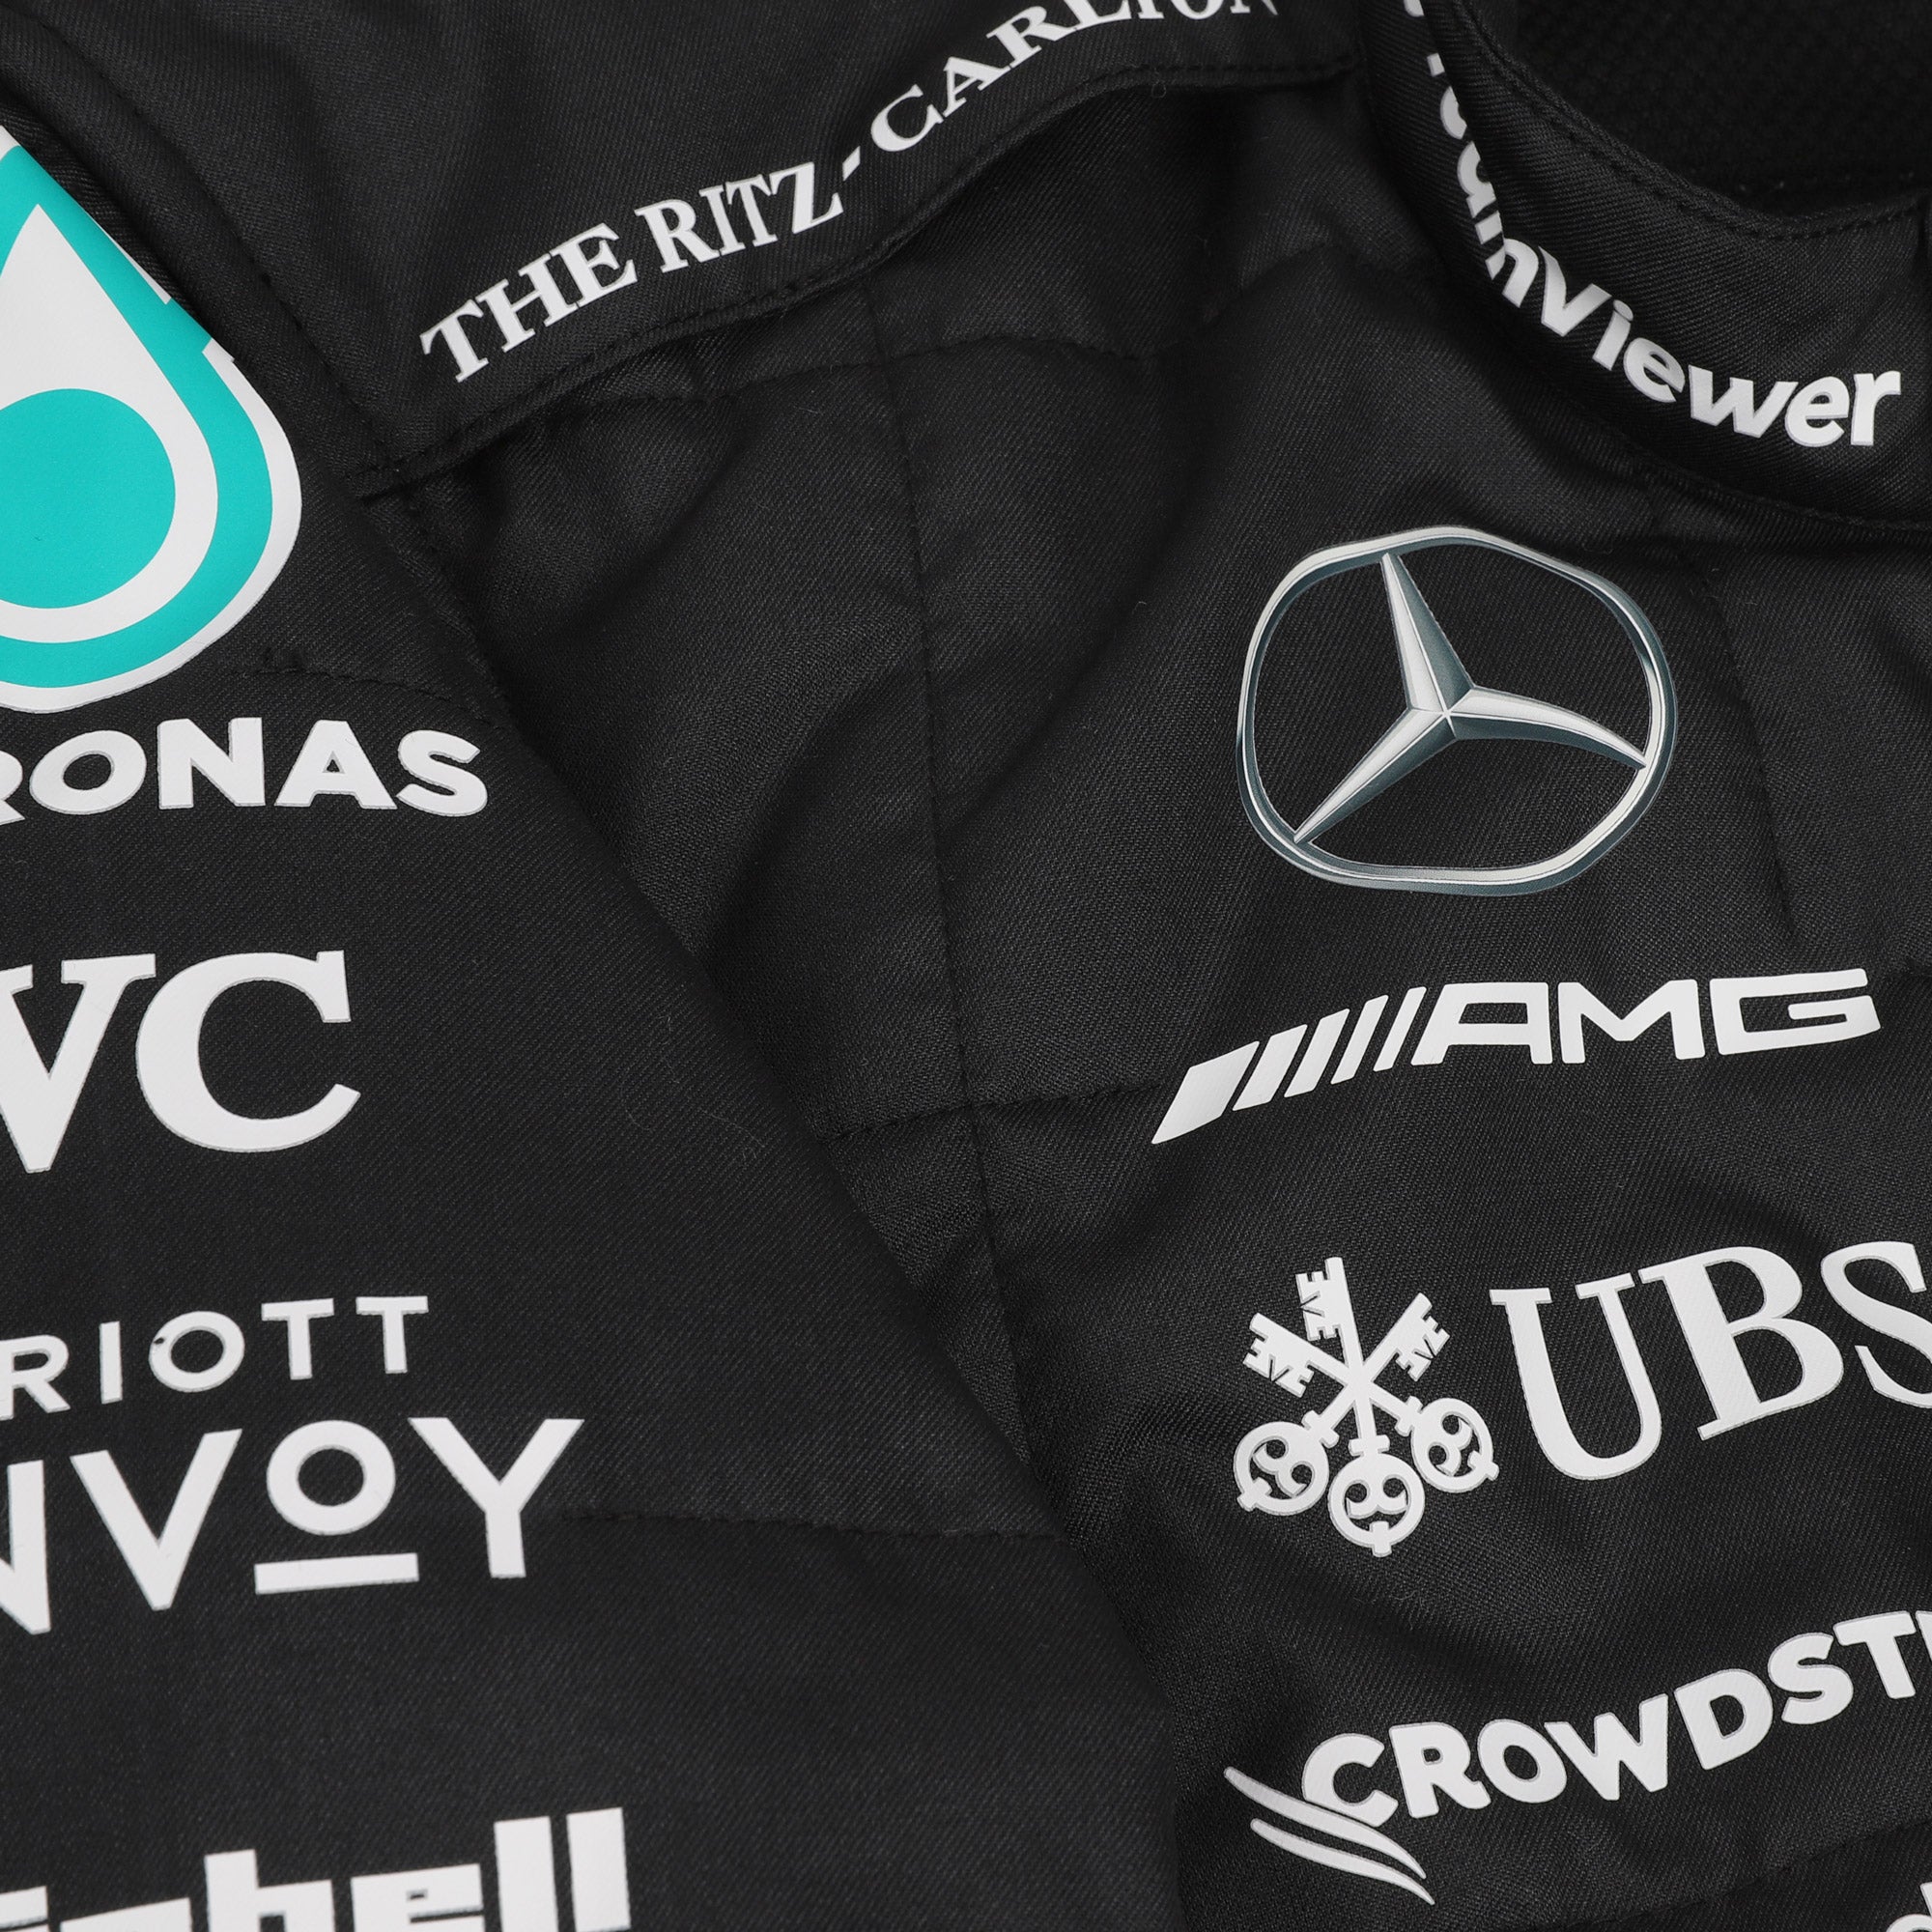 Officially Licensed 2023 Mercedes-AMG Petronas F1 Team Race Suit - Lewis Hamilton Edition